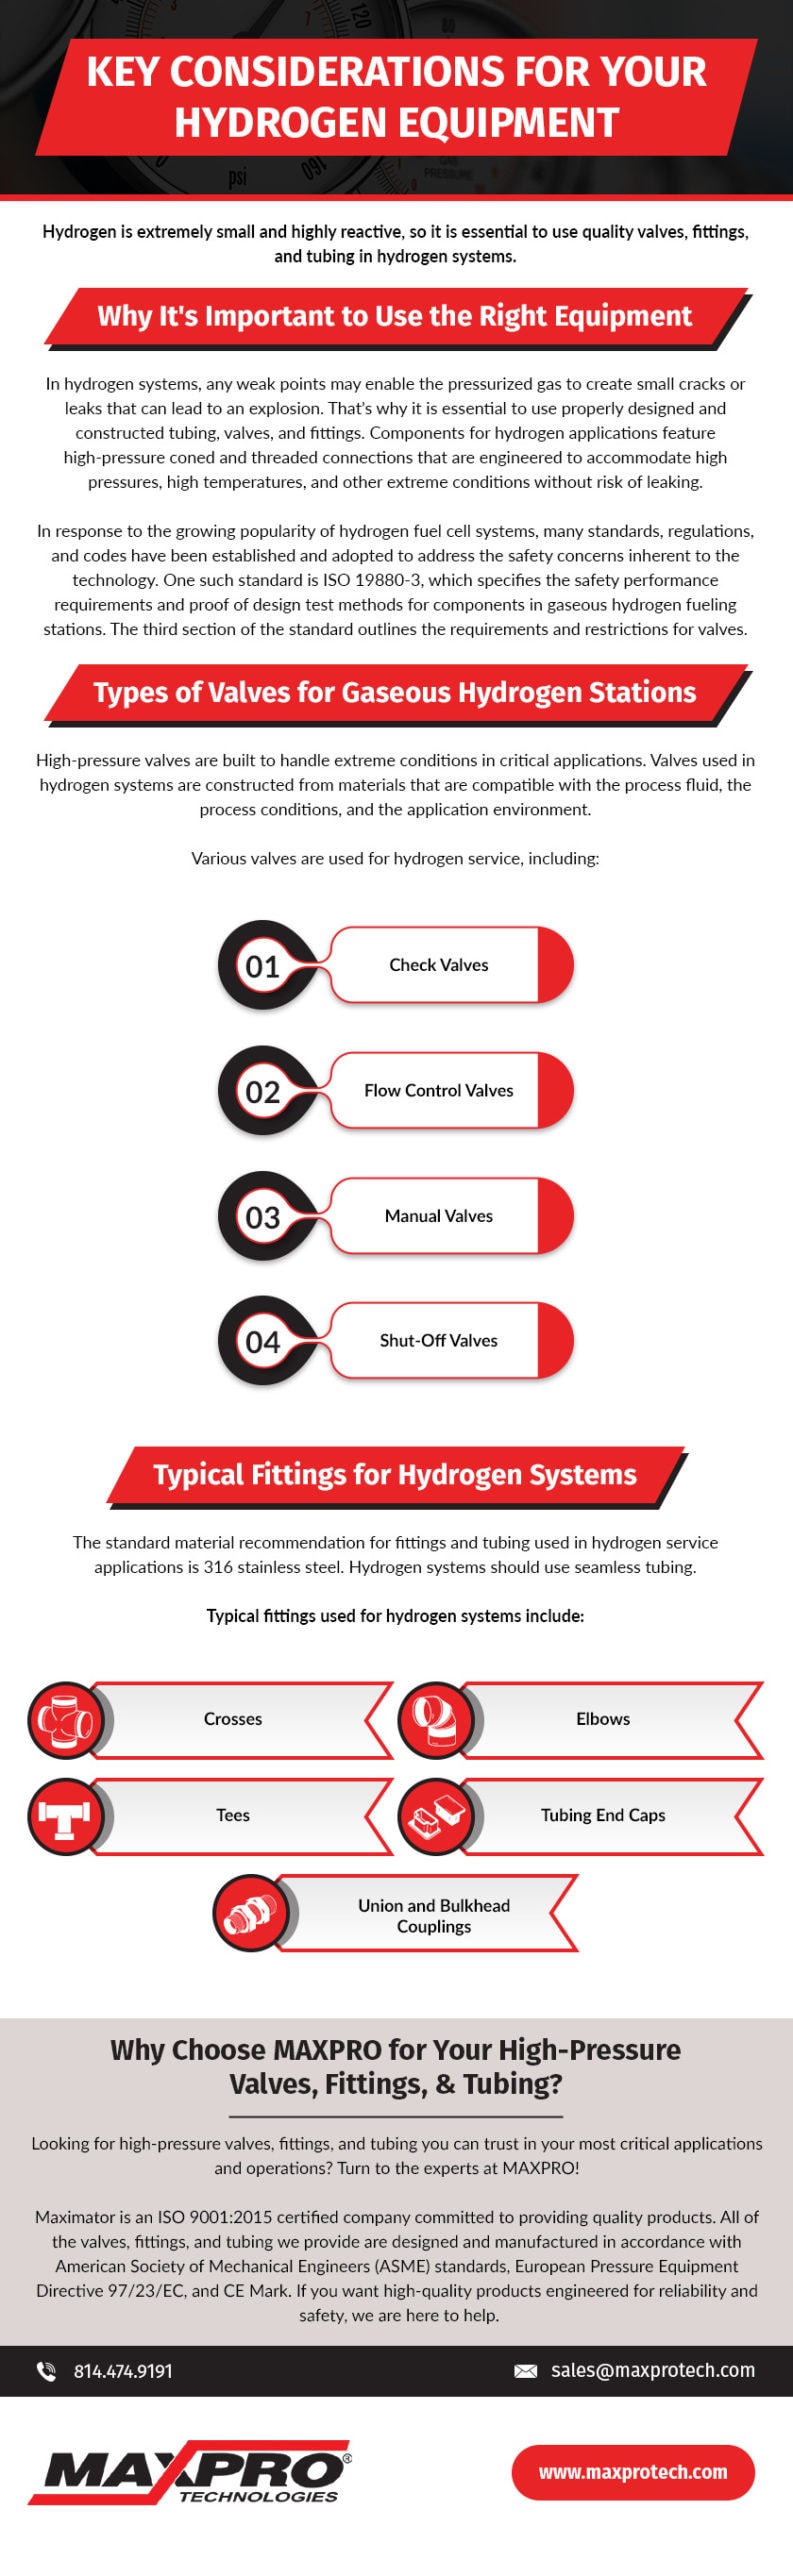 considerations for hydrogen equipment